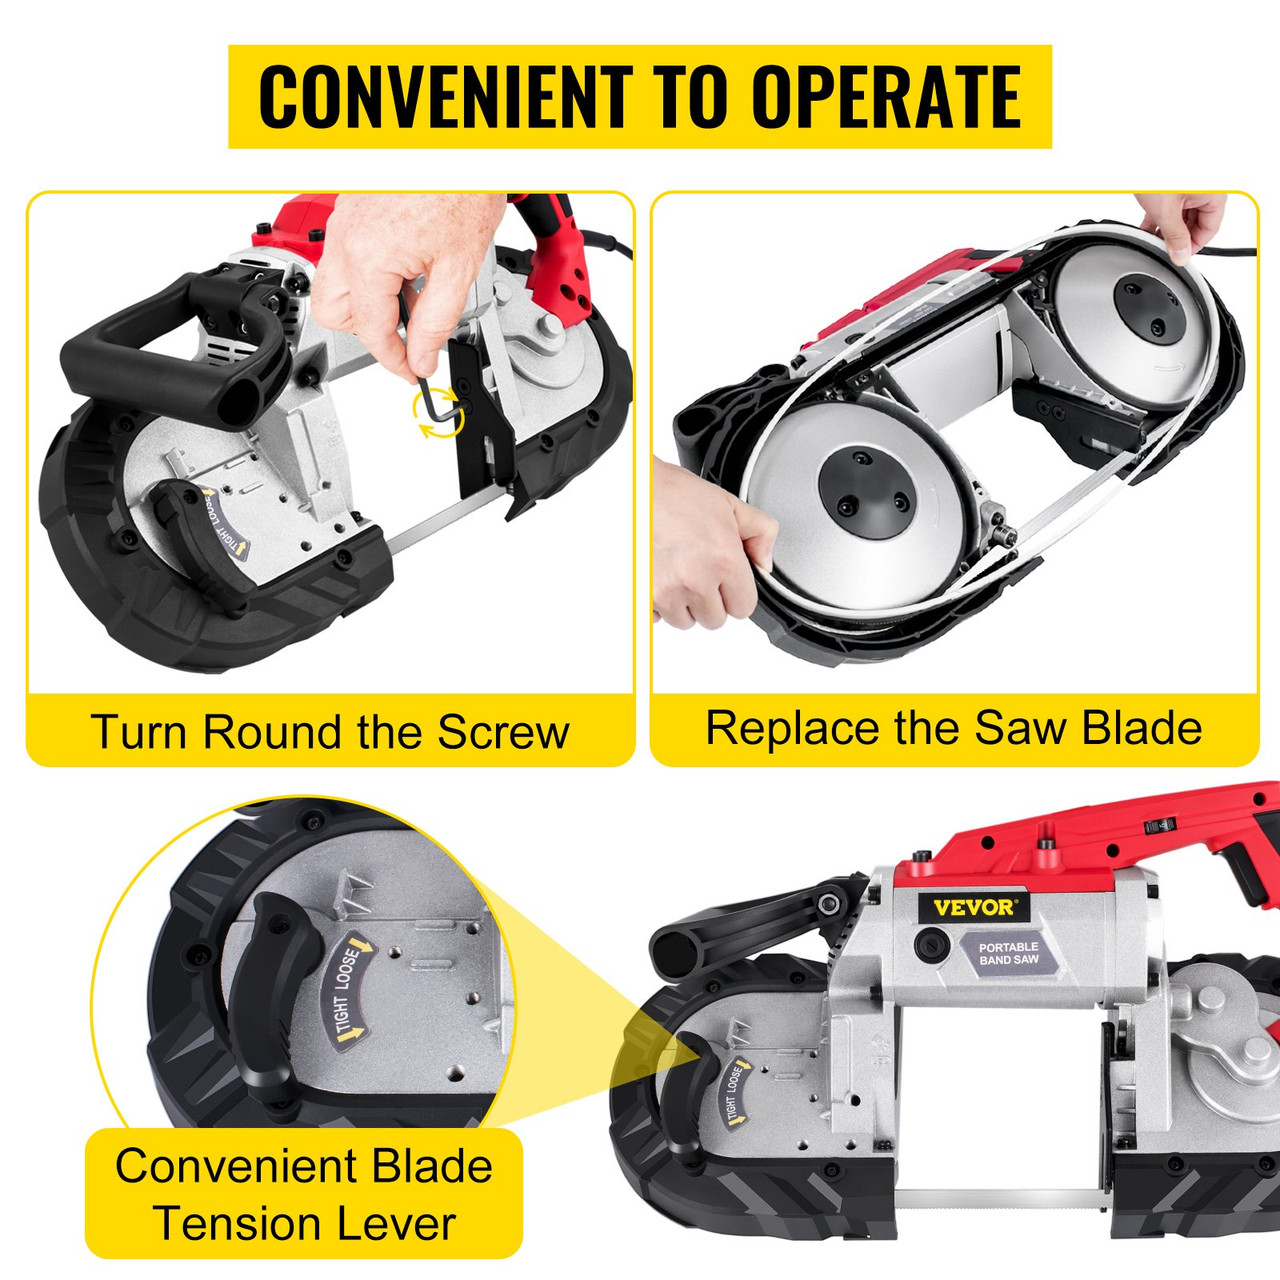 Portable Band Saw, 5Inch Cutting Capacity Cordless BandSaw, Variable Speed  Hand held Band Saw,10Amp Motor